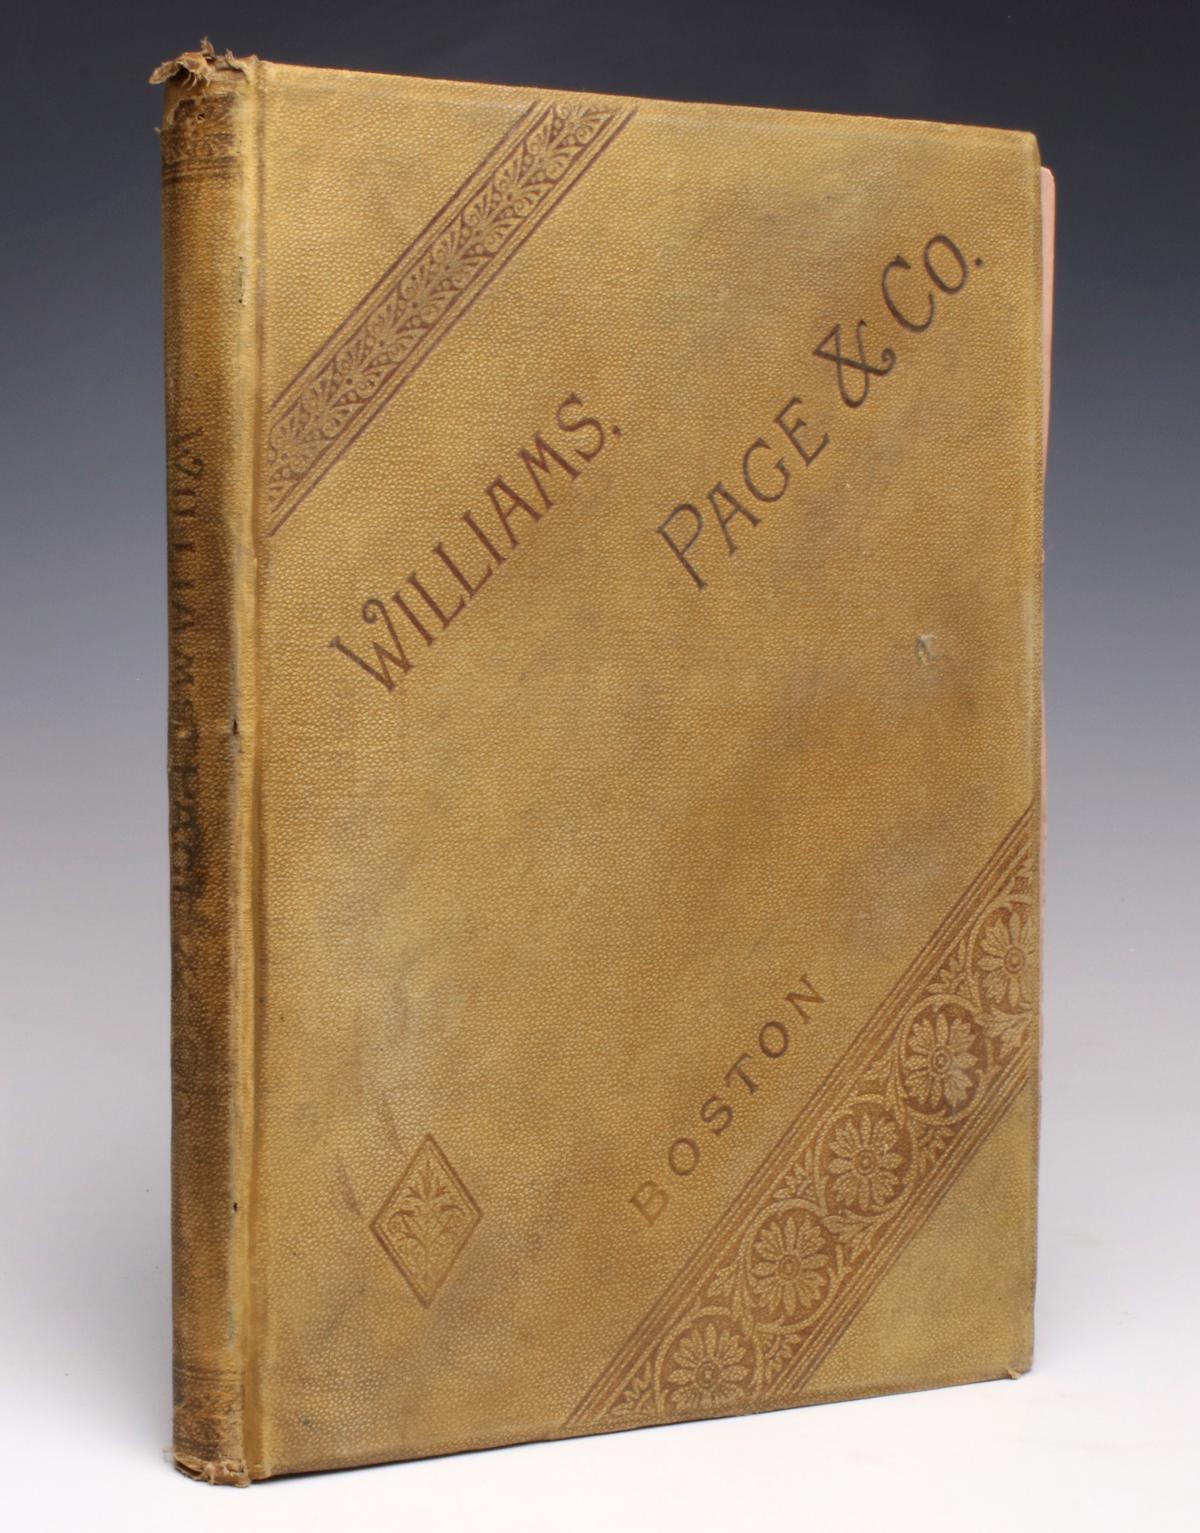 WILLIAMS, PAGE & CO RAILROAD TRIMMINGS CATALOG